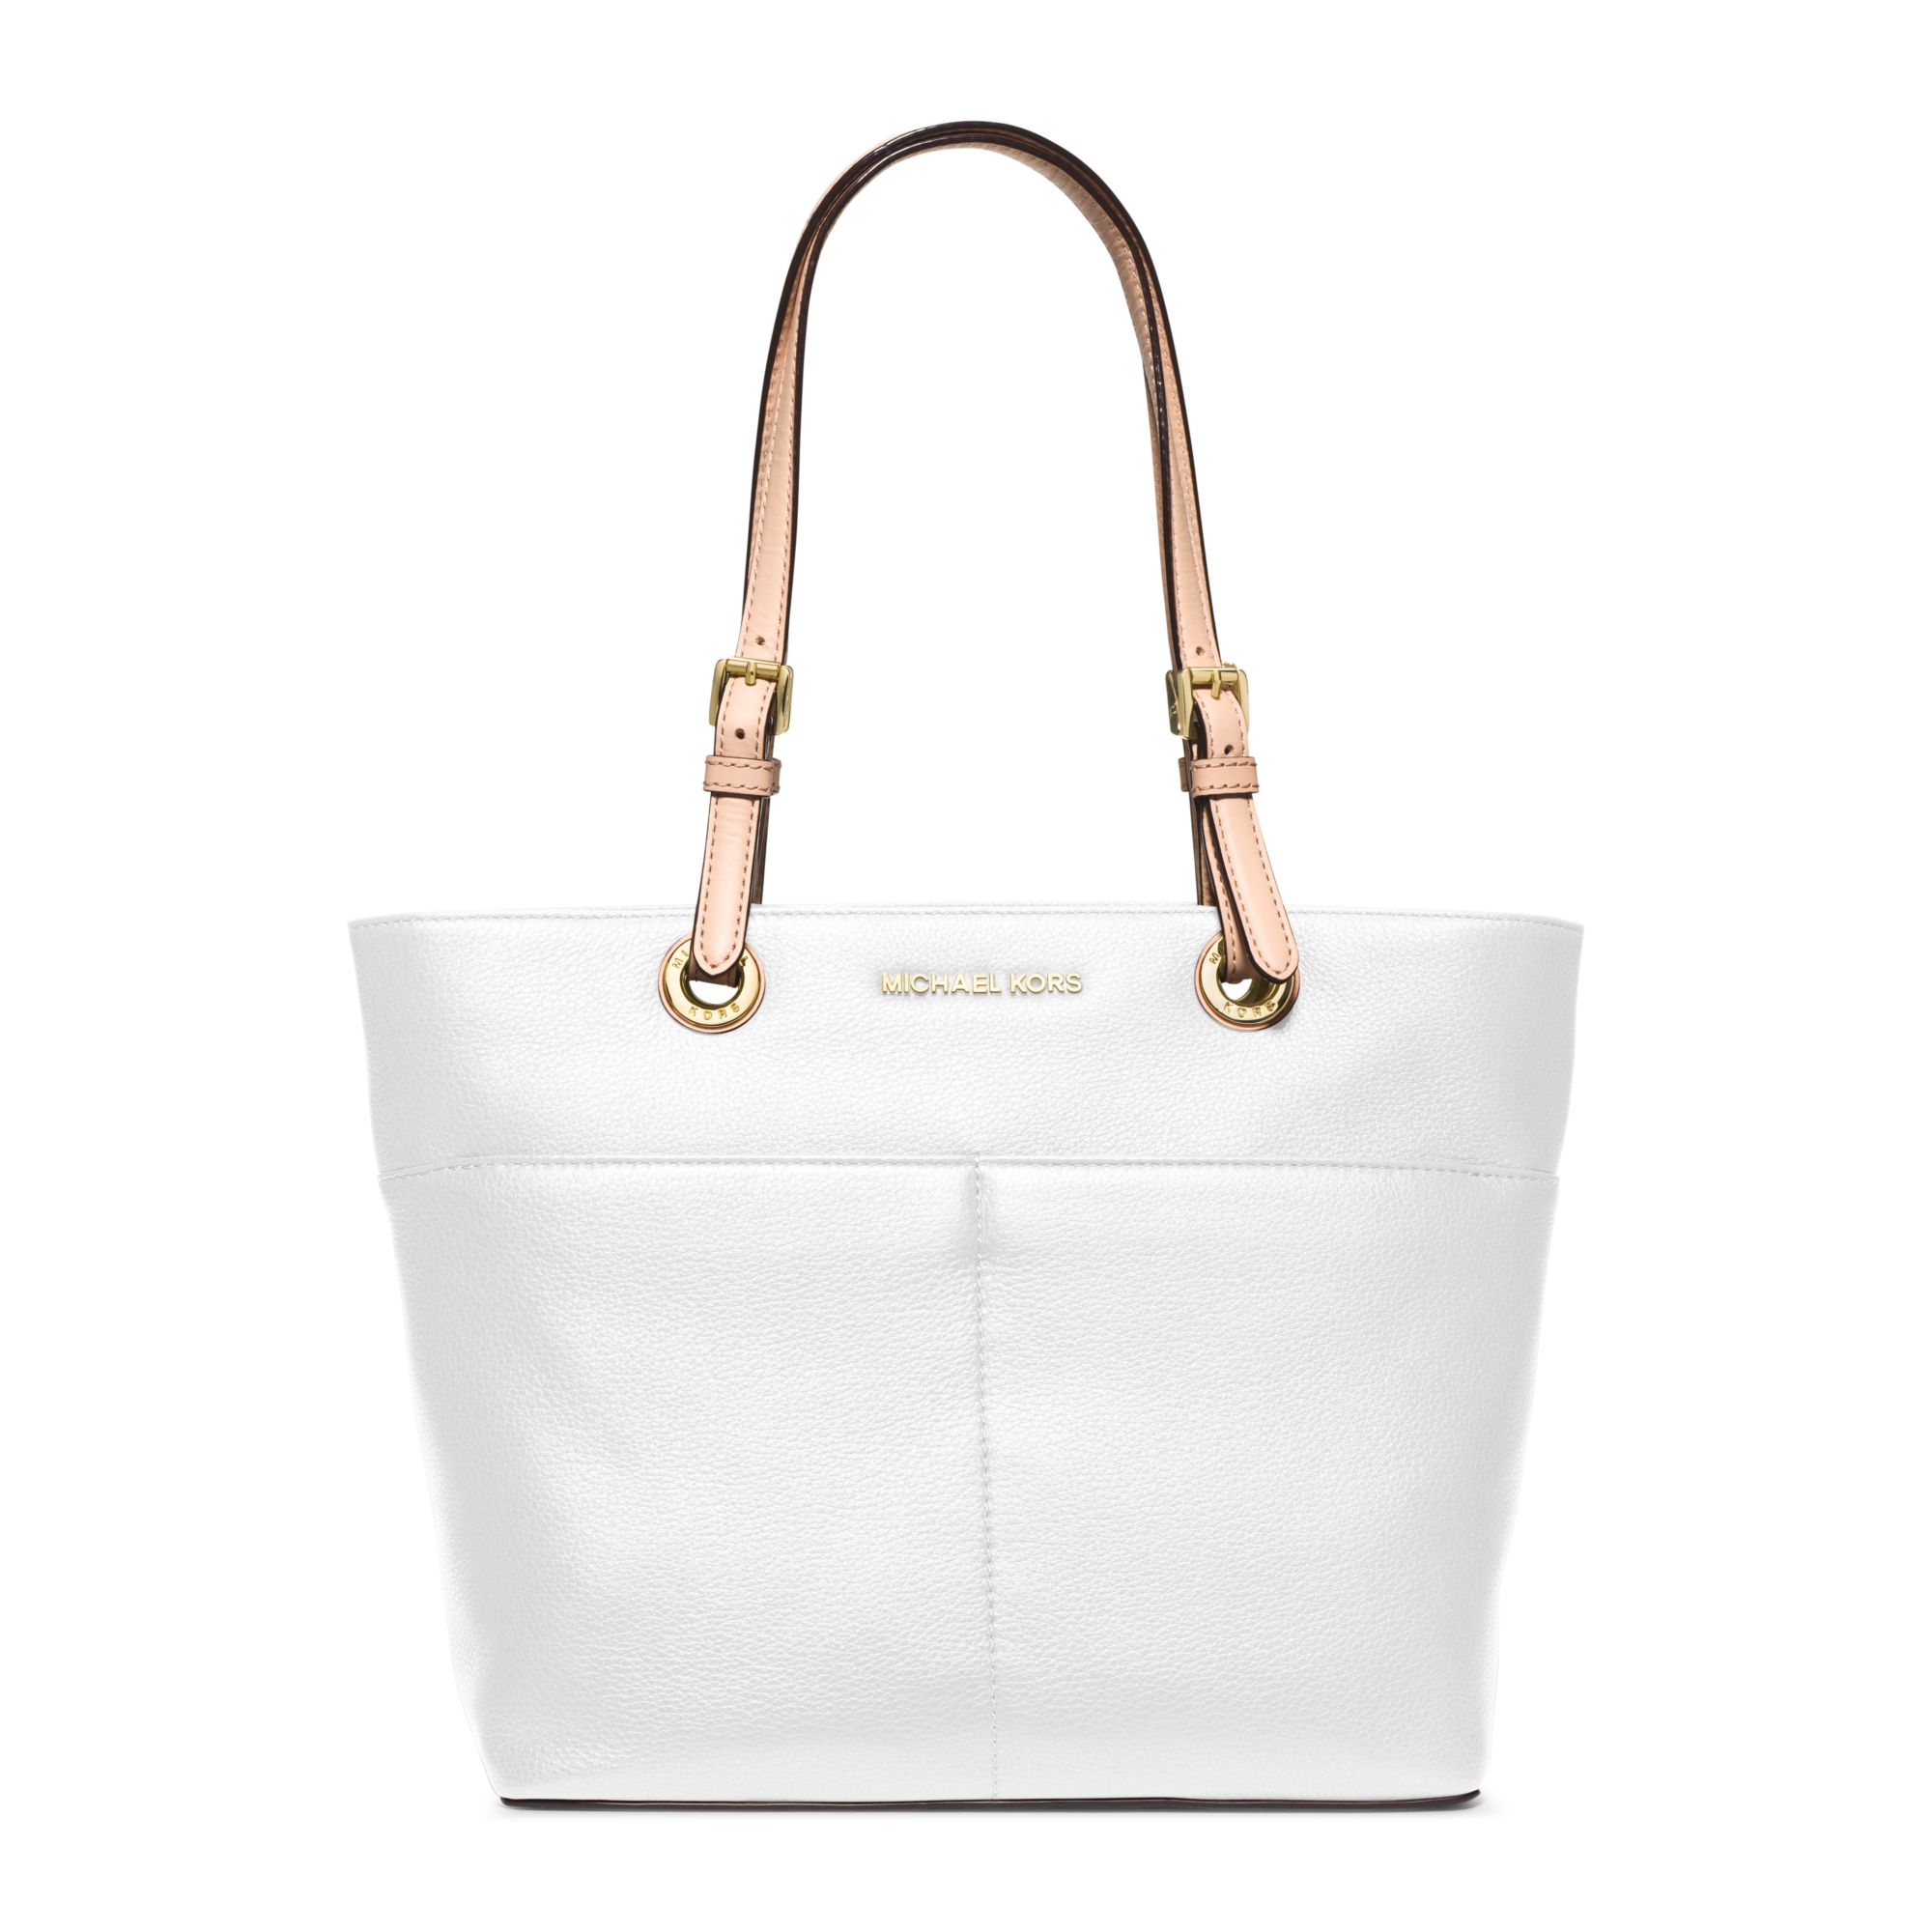 Michael kors Bedford Leather Tote in White | Lyst